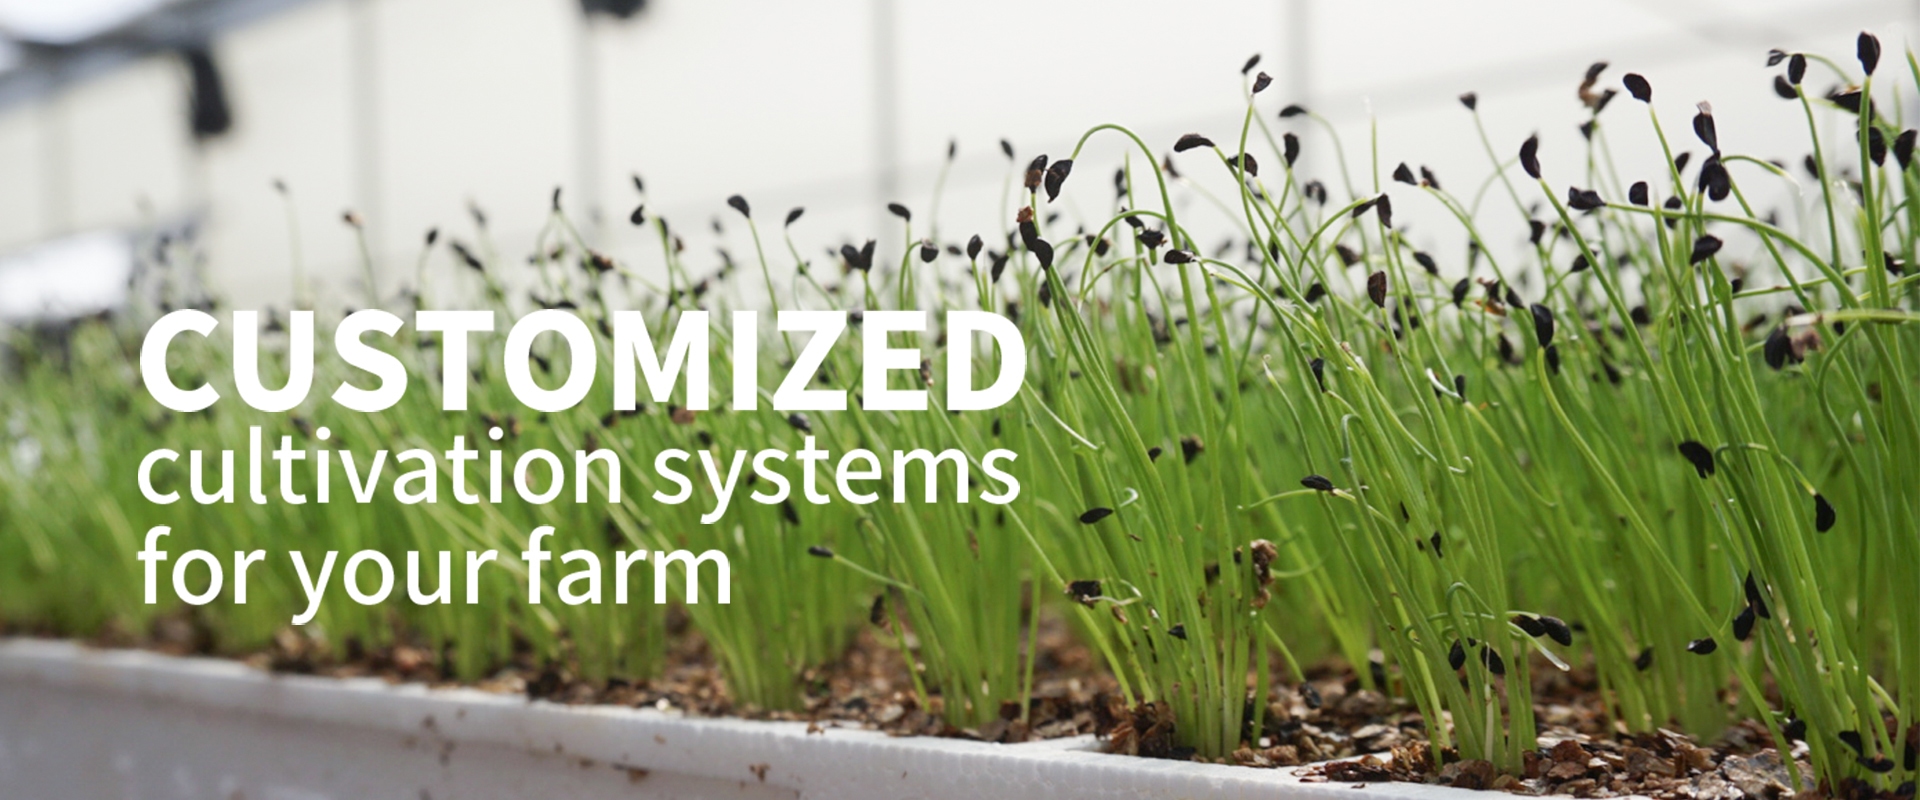 customized cultivation systems for your farm